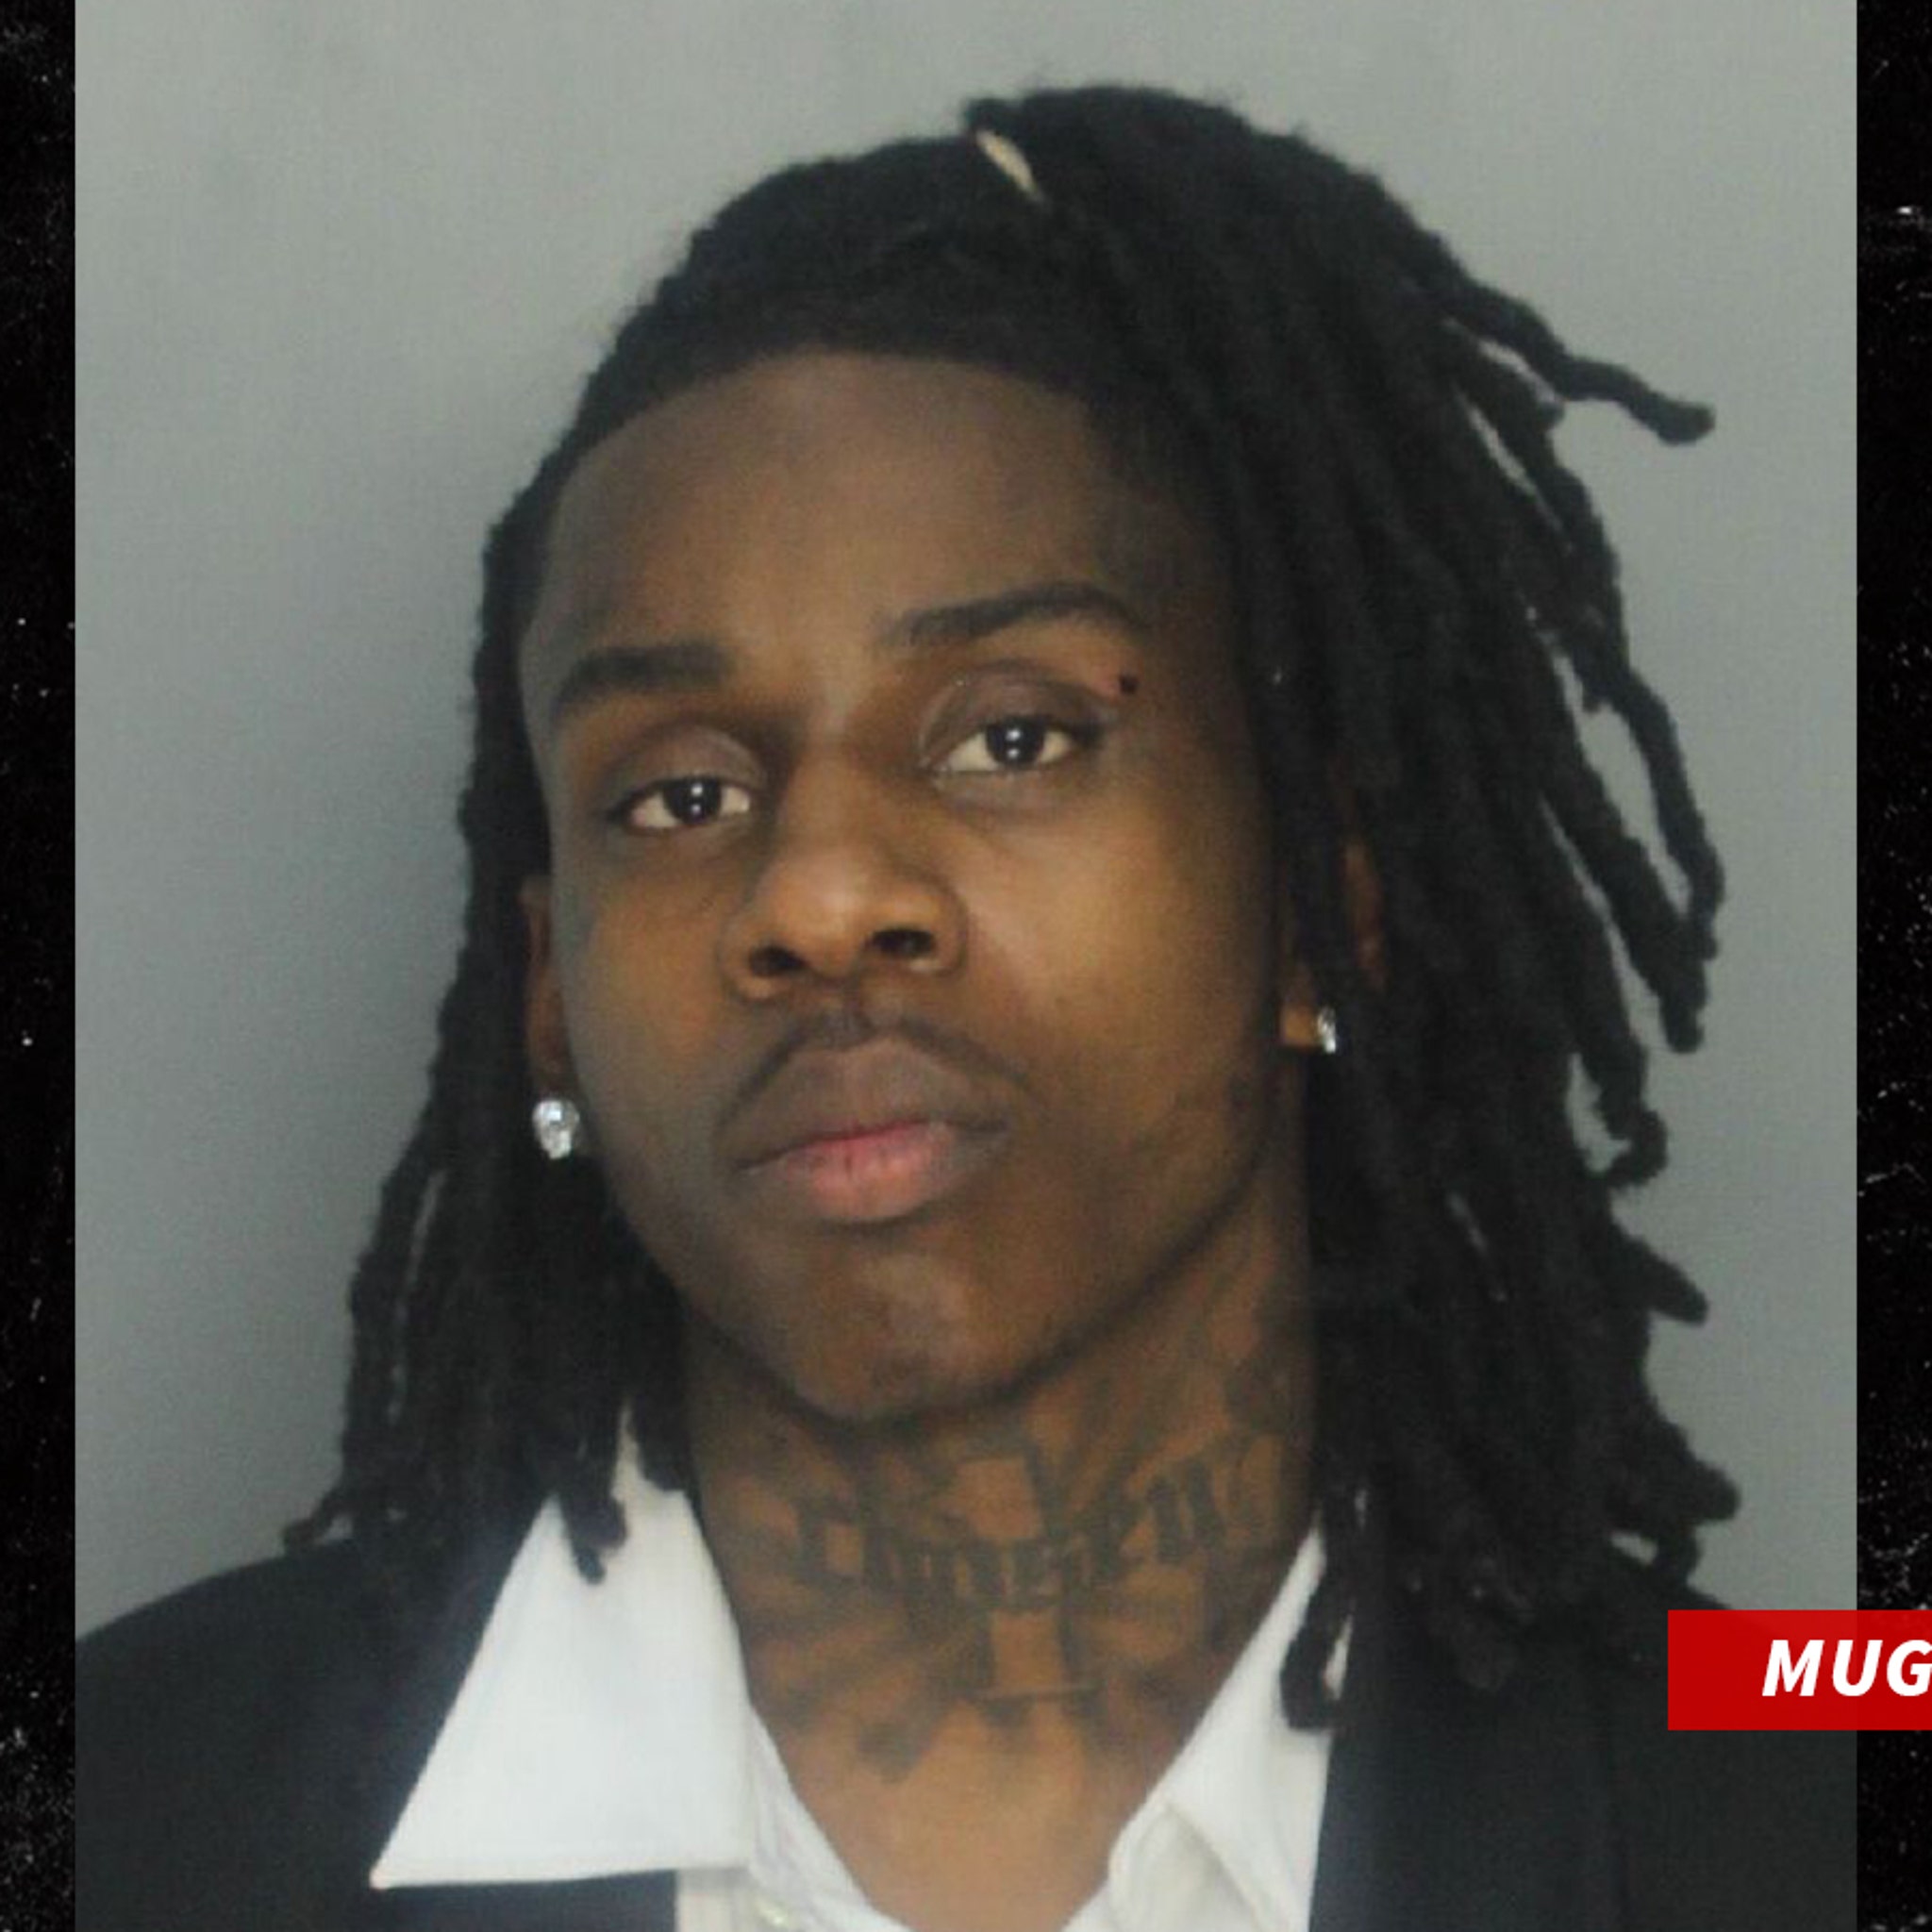 Rapper Polo G Arrested for Attacking Cop in Miami, 2 Guns Found